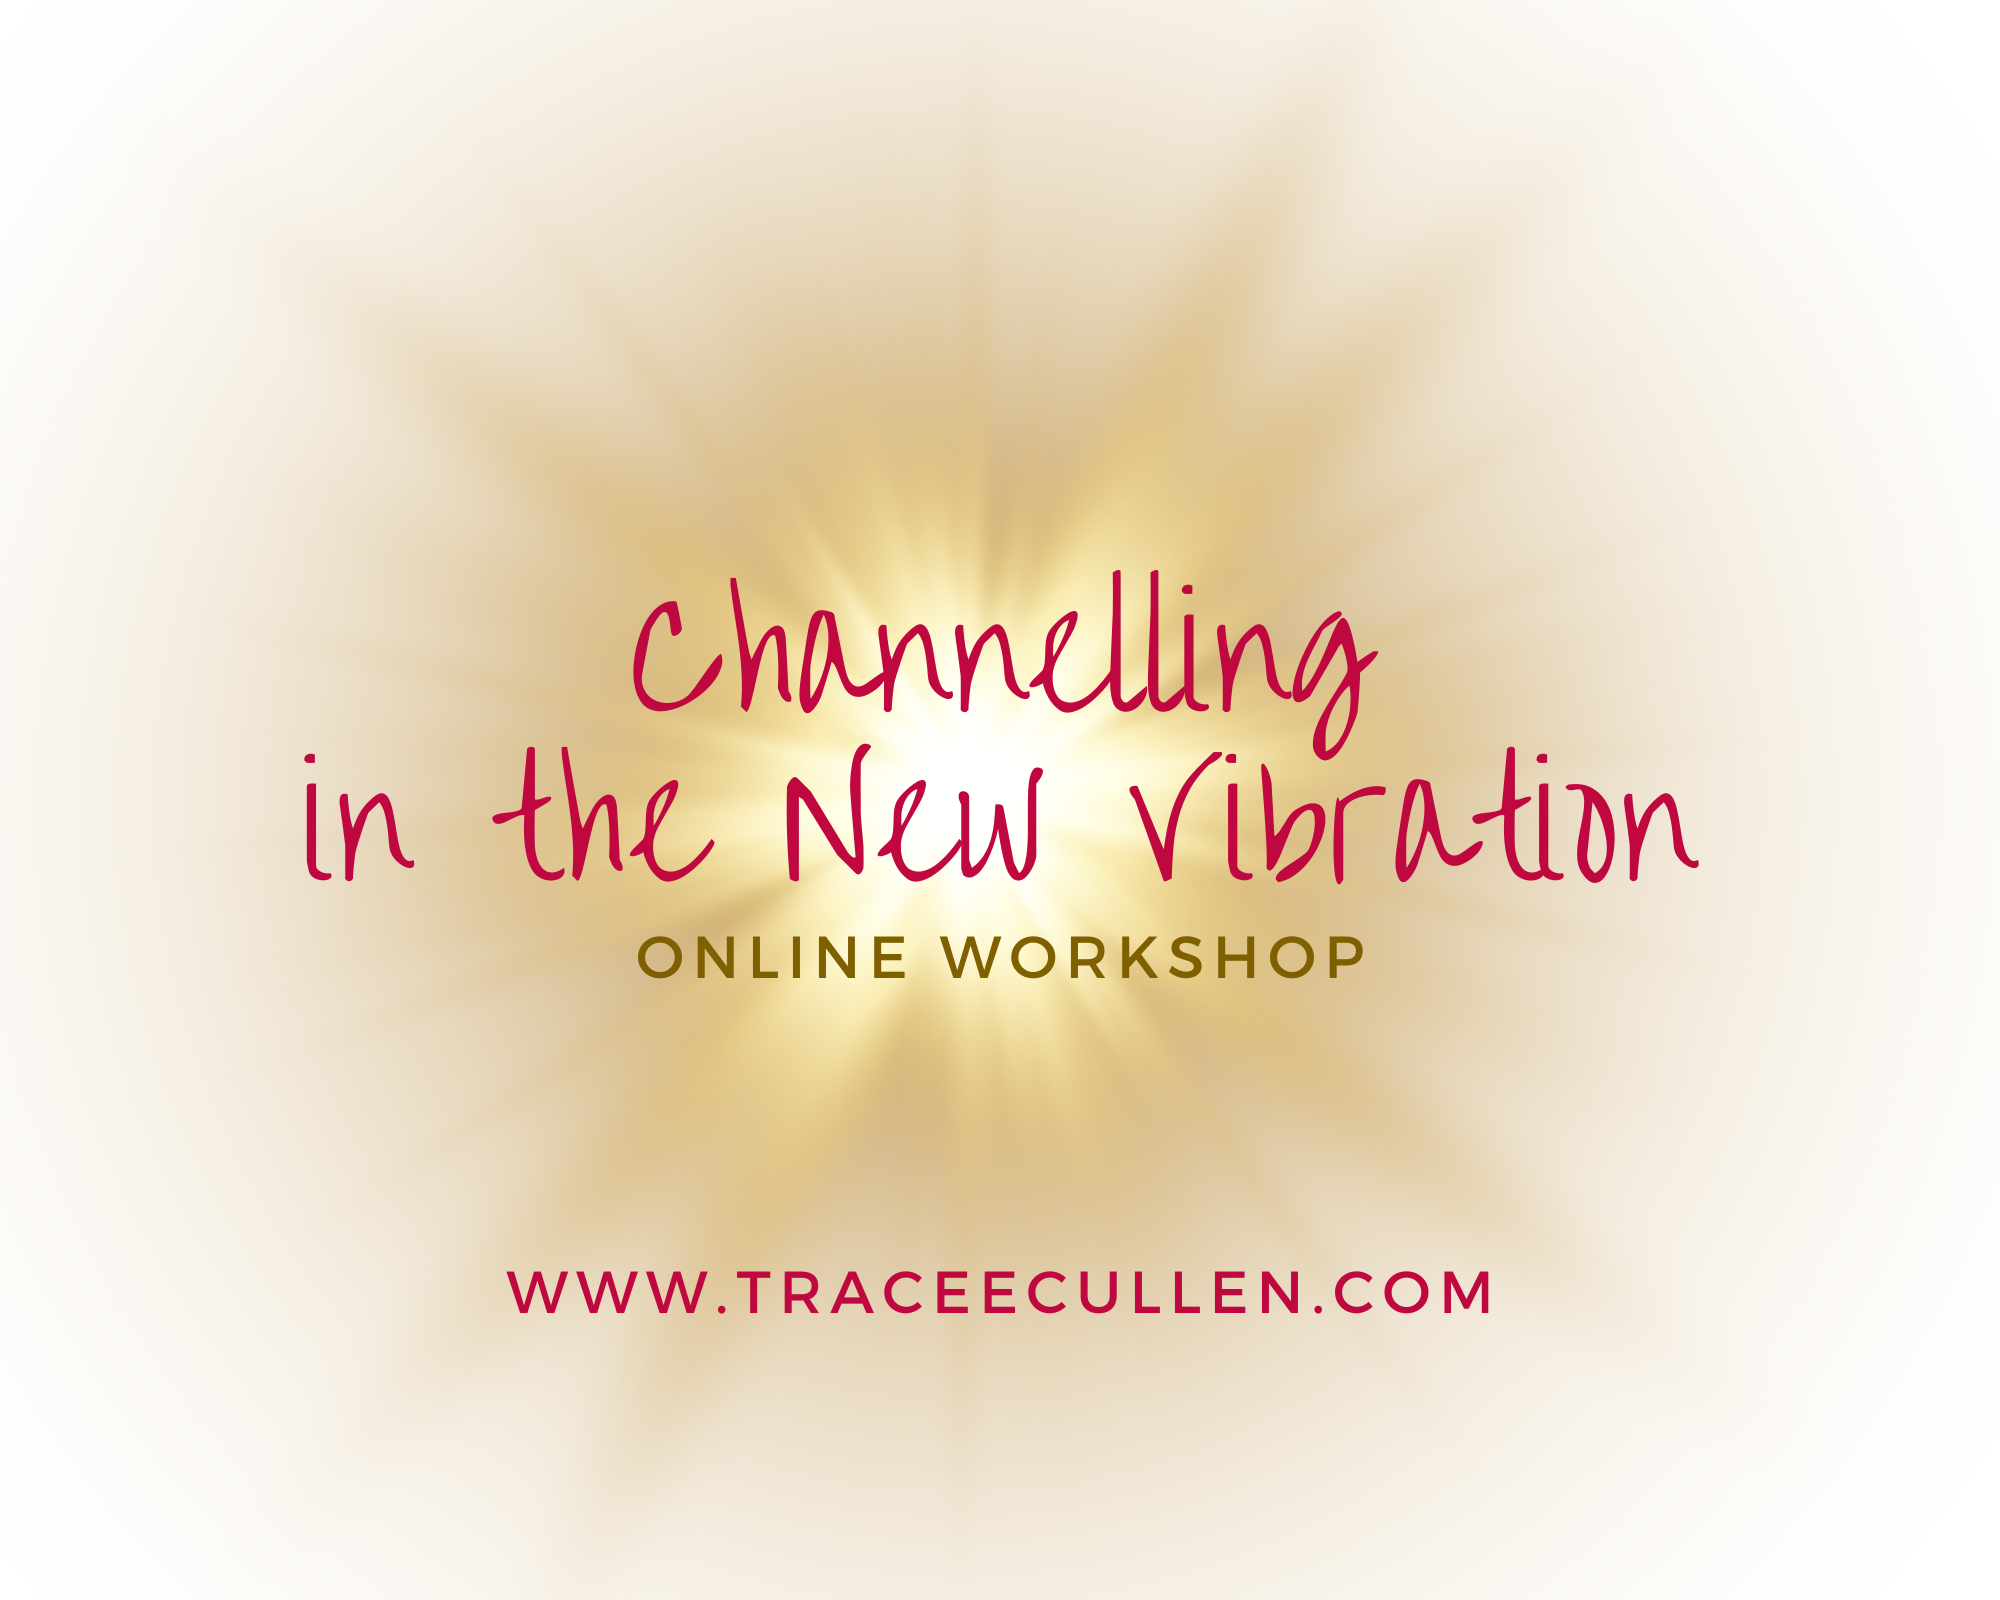 Channelling in the new vibration